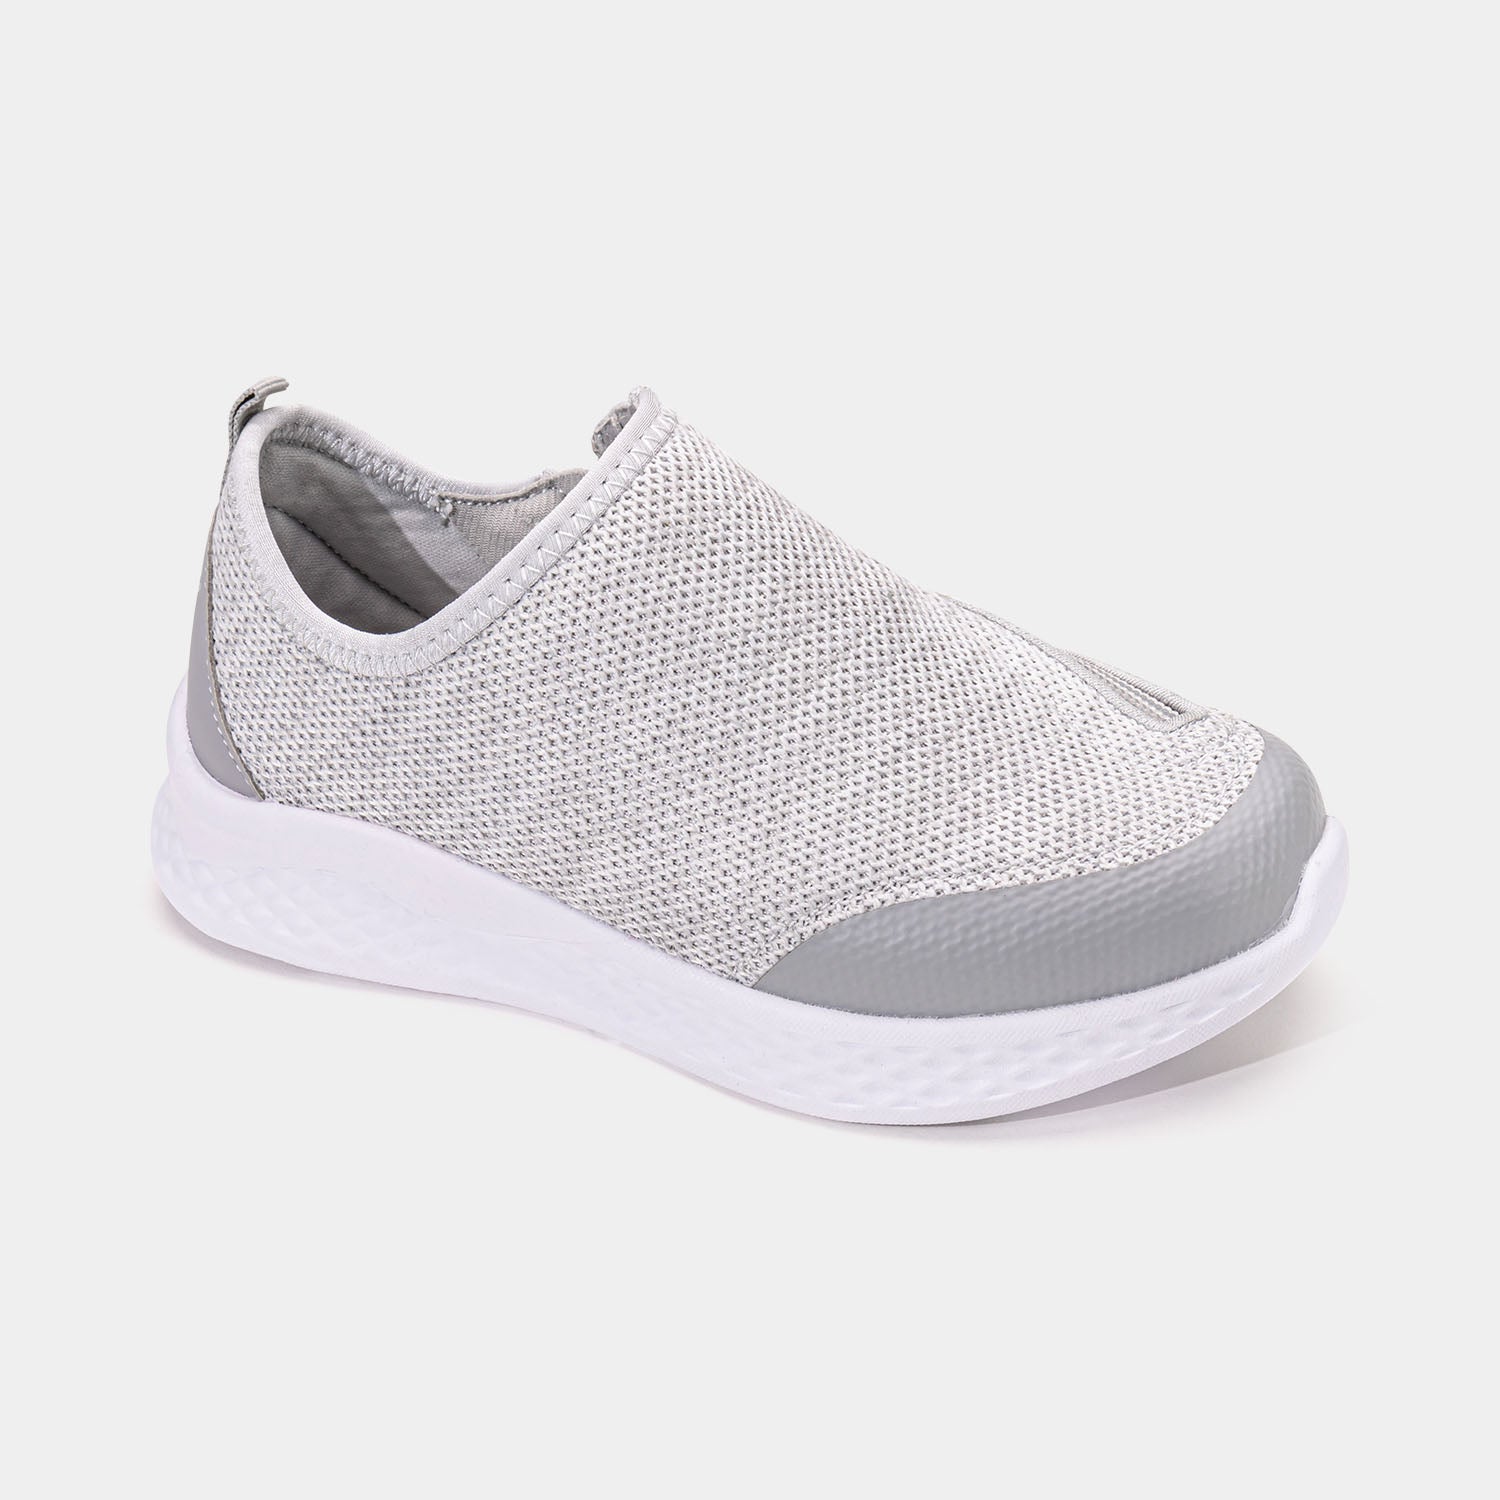 Grey kids shoe with white bottom, dark grey accents, and side zipper access.